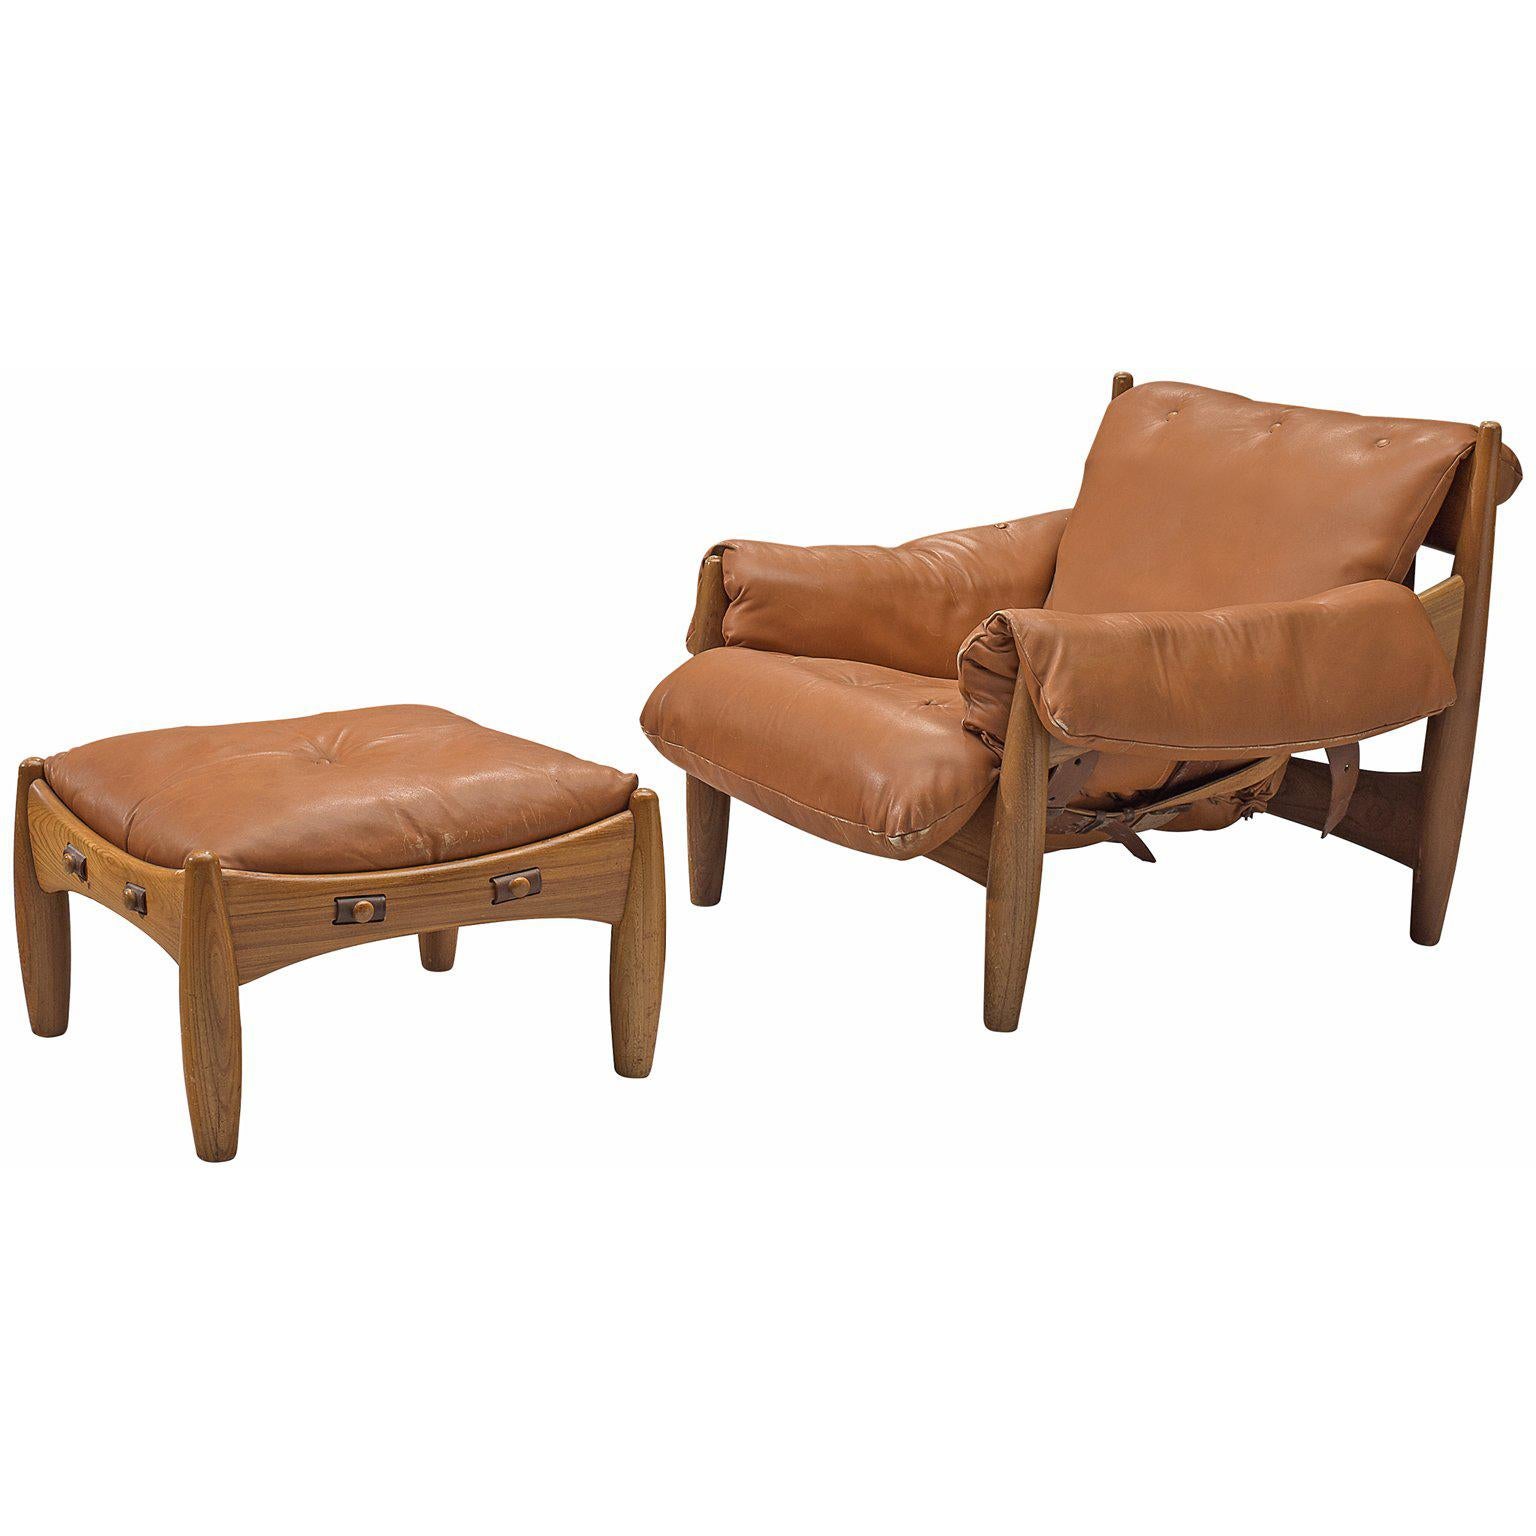 Sergio Rodrigues, 'Sheriff' Lounge Chair with Ottoman in Original Cognac Leather